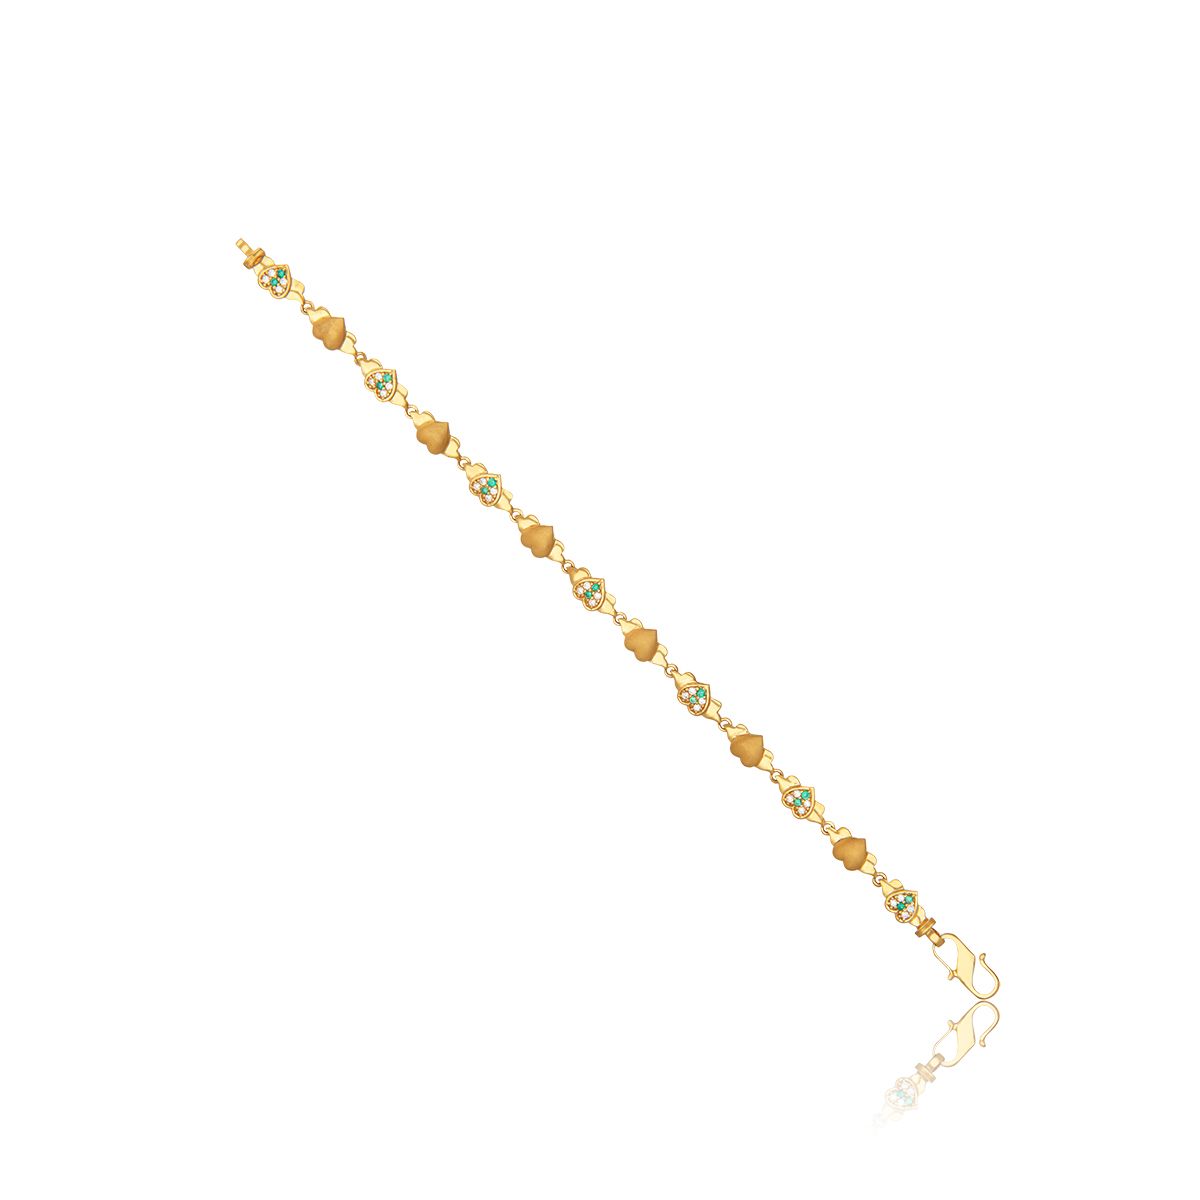 The Indianna Jewellers Top Model New Design Star Charm Chain Gold Plated  Handmade Bracelet at Rs 600/piece in Jaipur